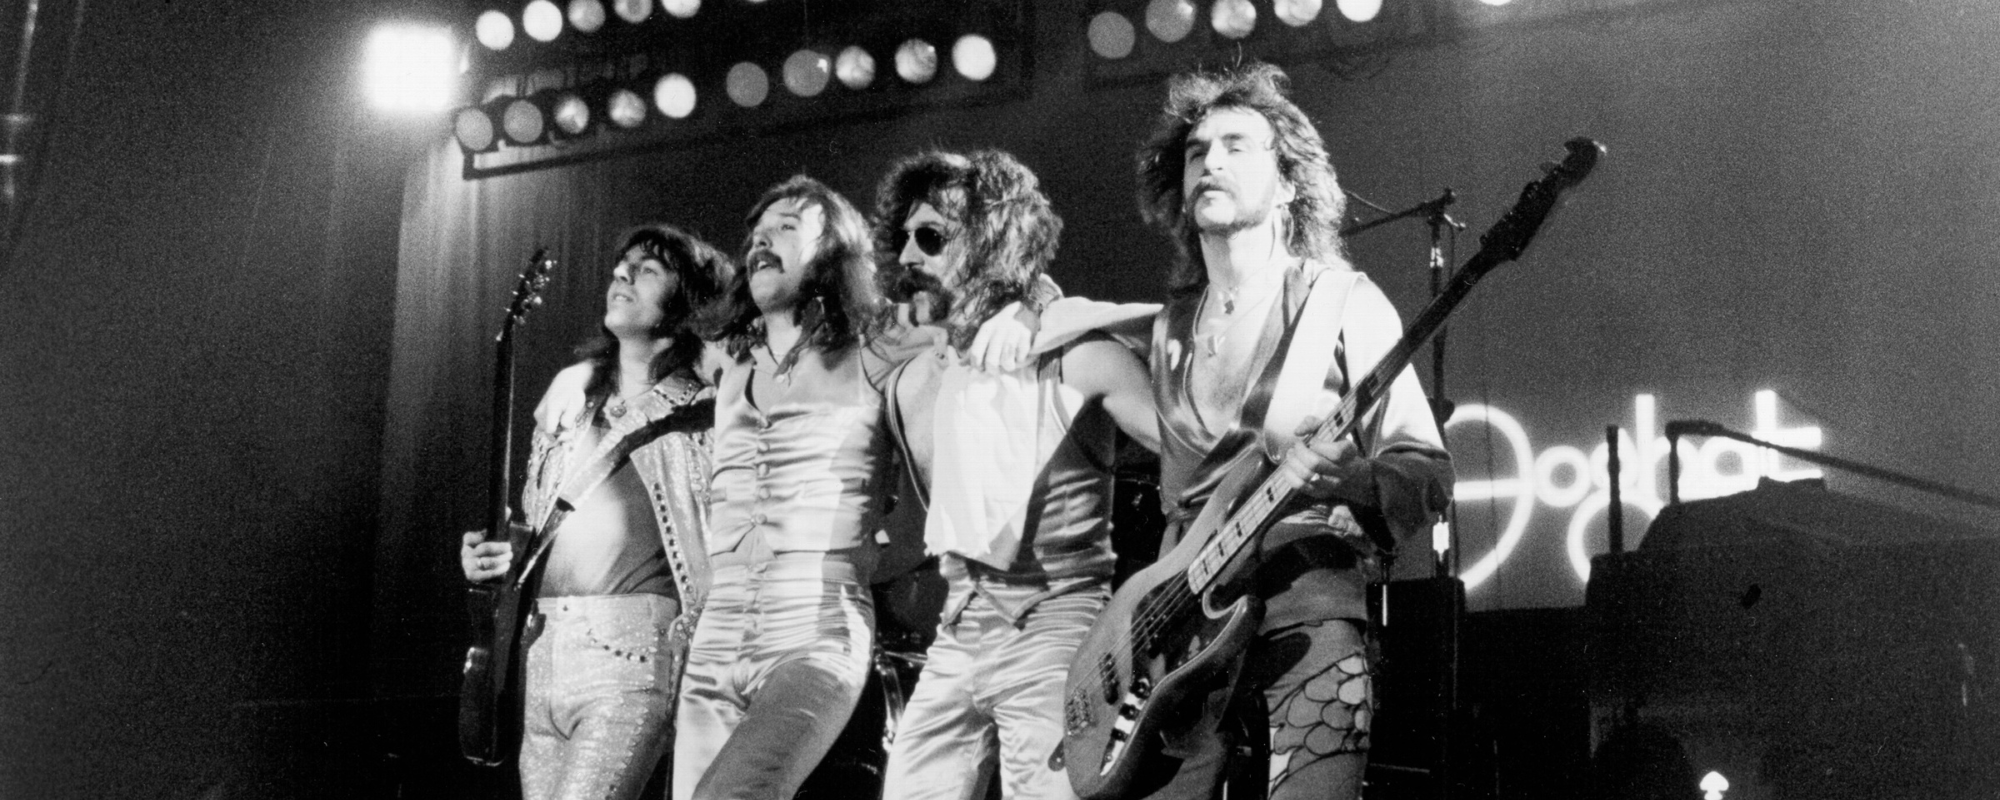 Foghat’s Influence on Southern Rock: How They Shaped a Genre